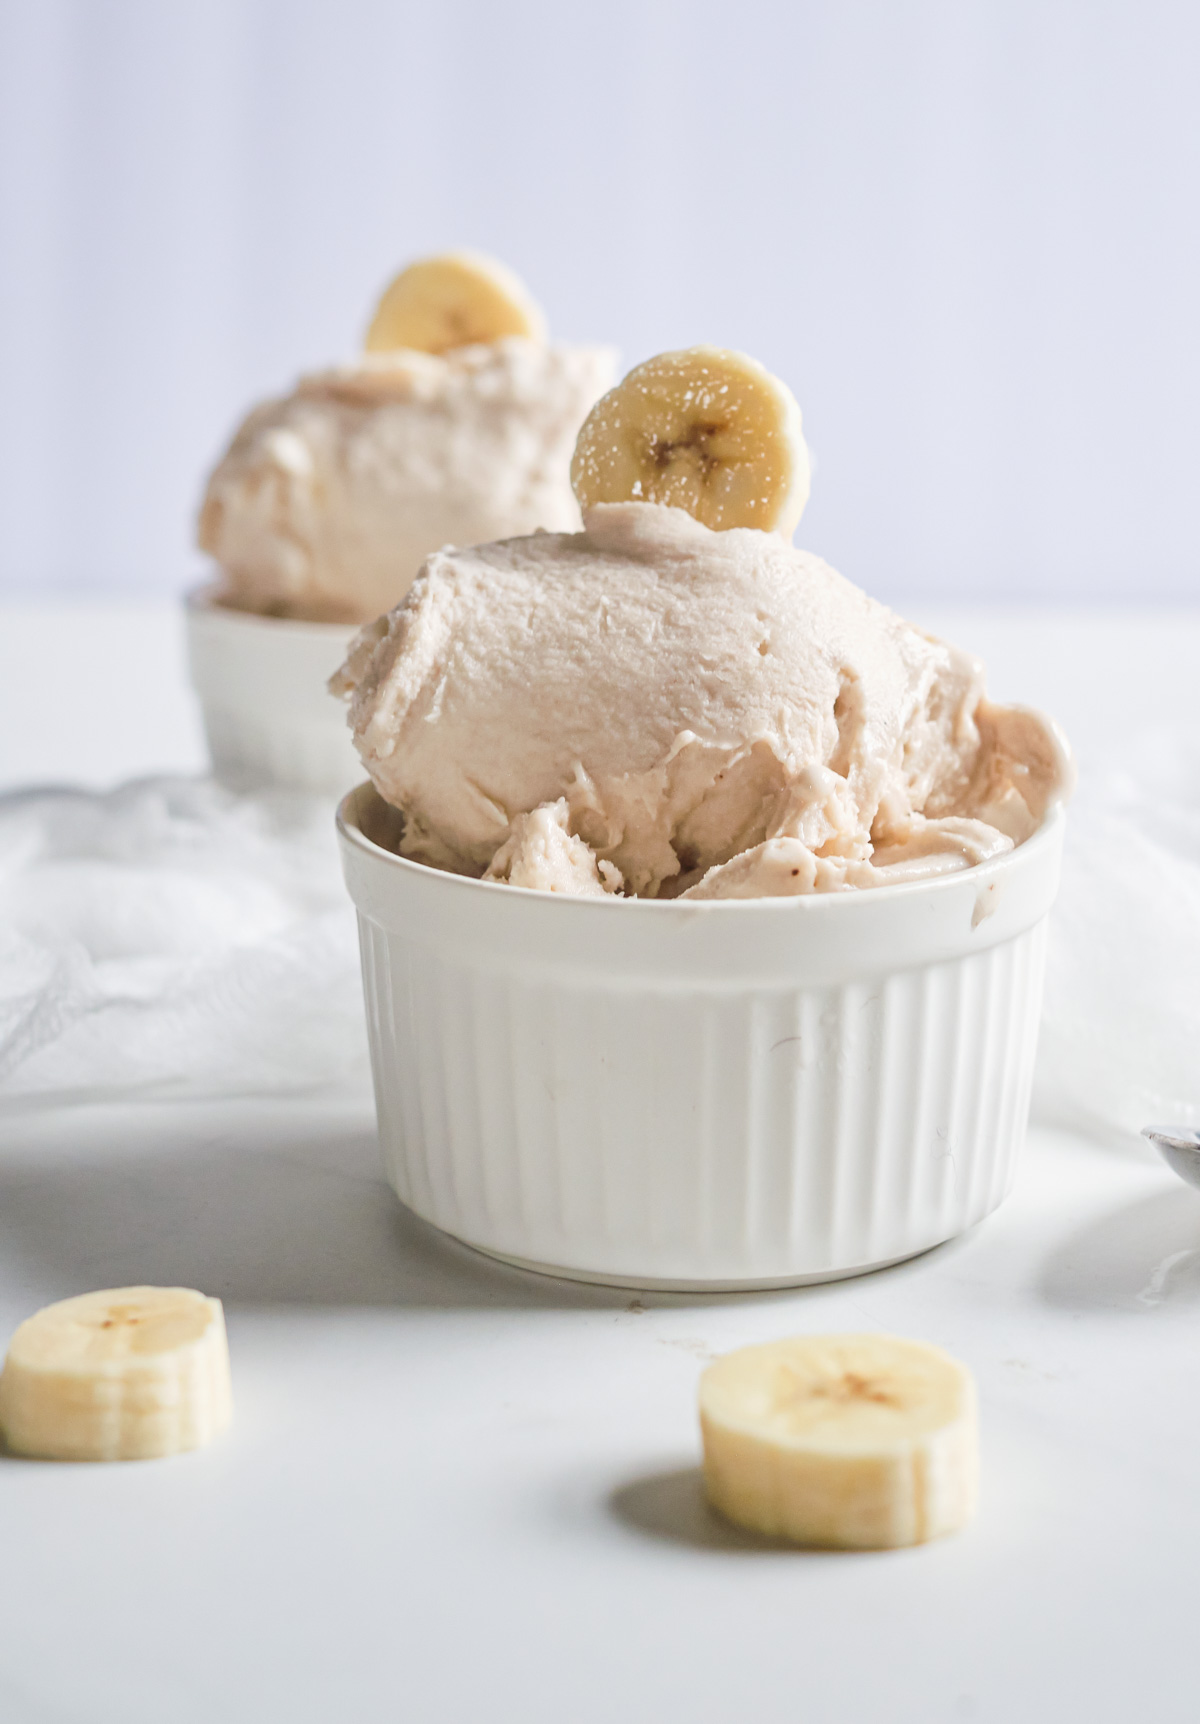 a scoop of banana ice cream in a white dish and topped with fresh banana slices